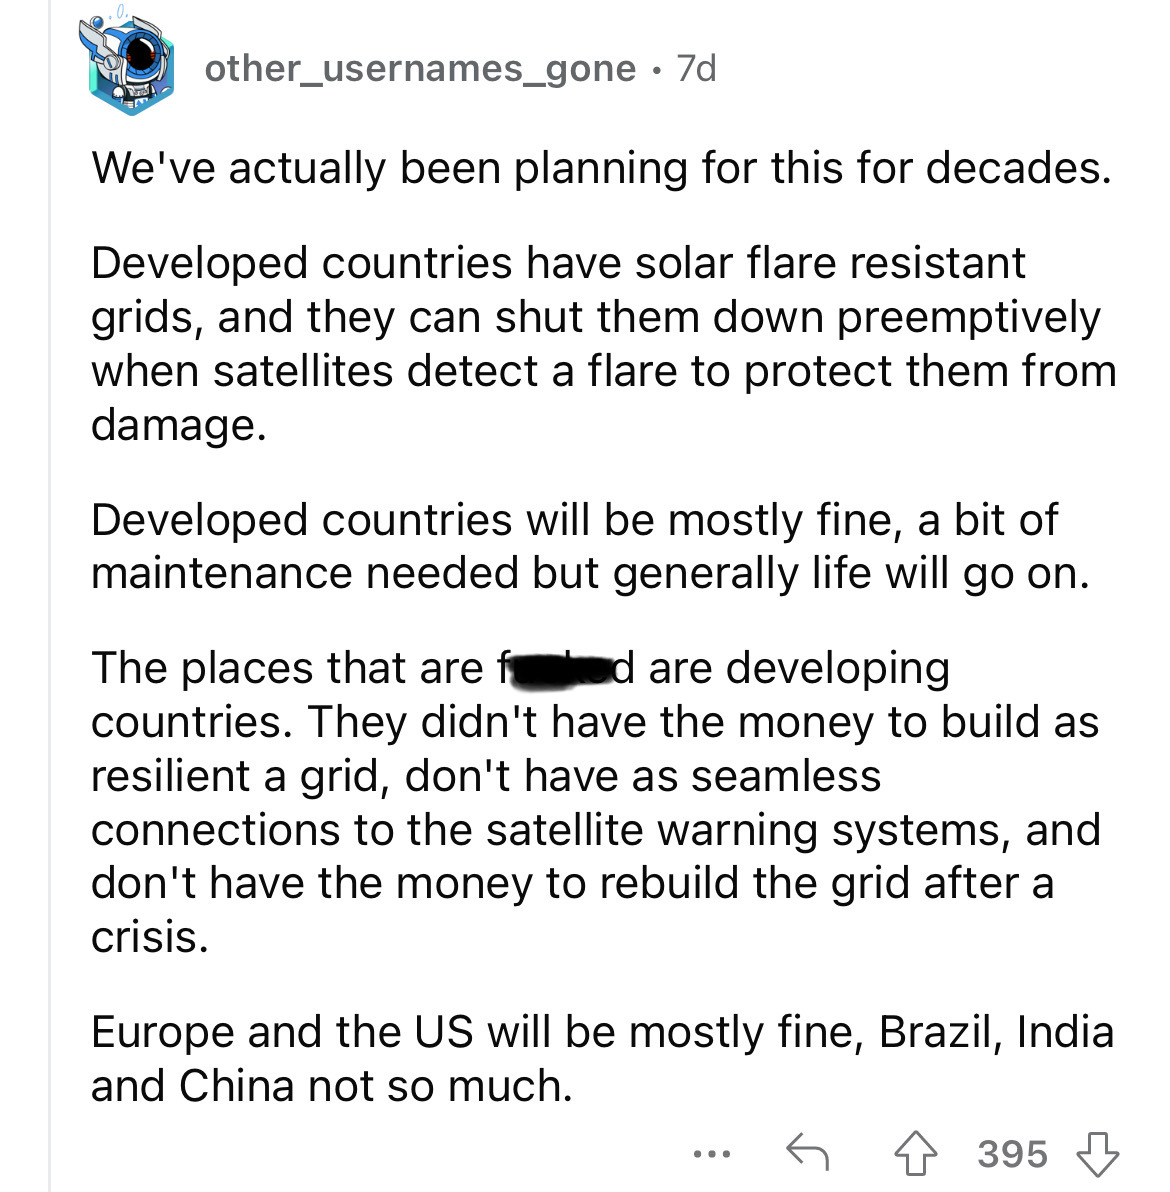 document - other_usernames_gone 7d We've actually been planning for this for decades. Developed countries have solar flare resistant grids, and they can shut them down preemptively when satellites detect a flare to protect them from damage. Developed coun